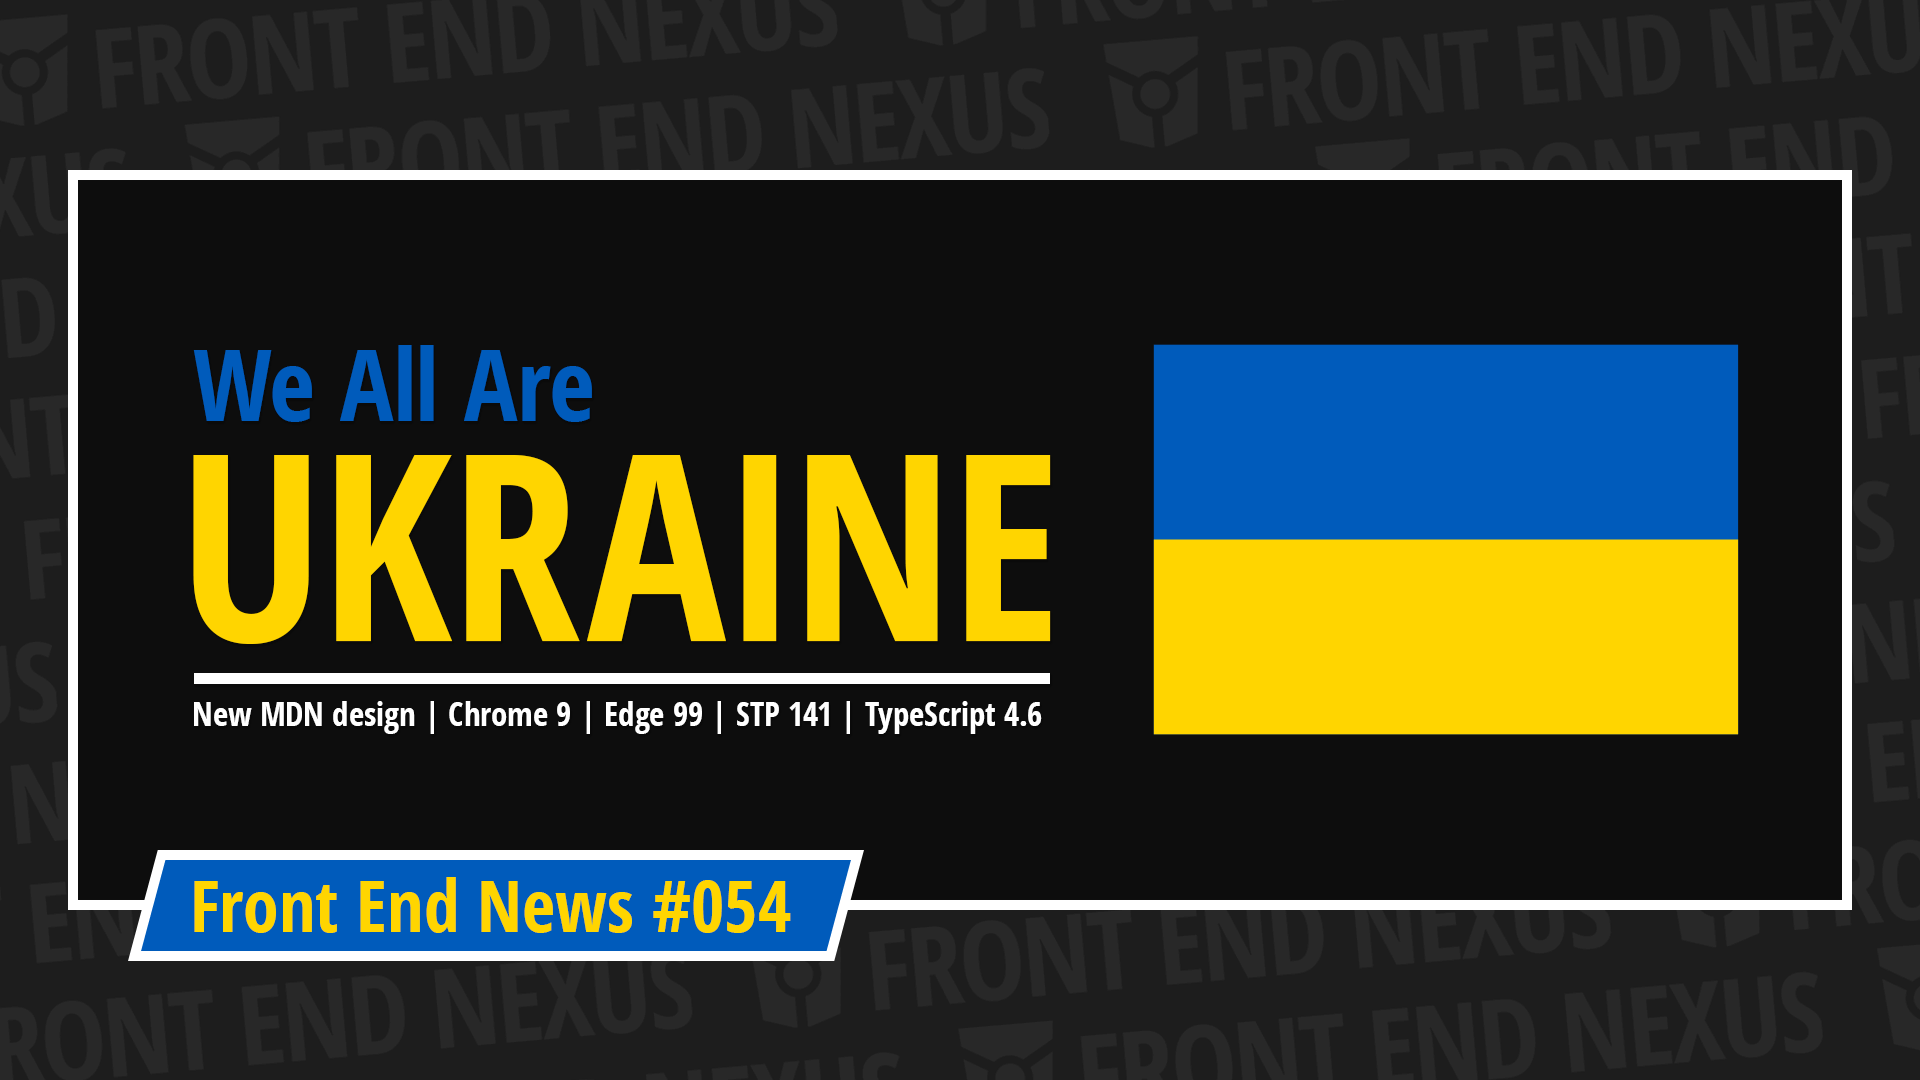 We all are Ukraine, the new MDN, Chrome 99, Edge 99, Safari Technology Preview 141, TypeScript 4.6, and more | Front End News #054